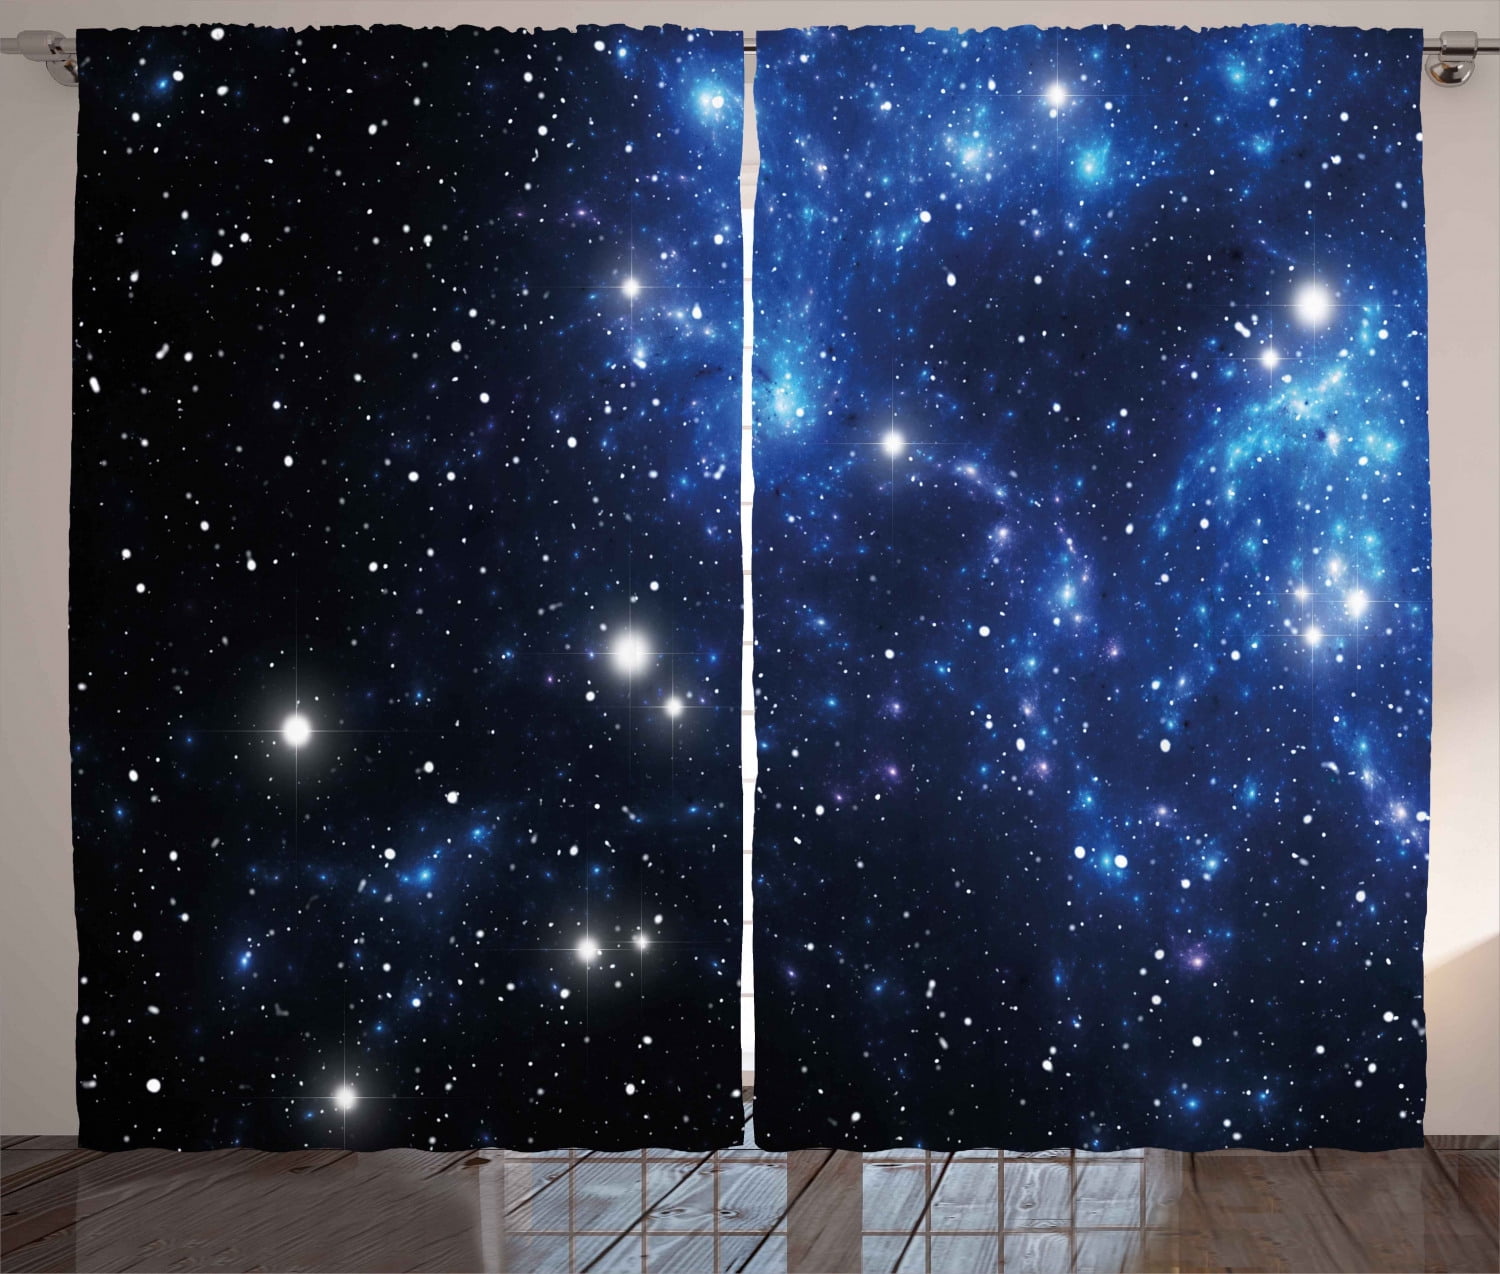 Constellation Curtains 2 Panels Set, Outer Space Star Nebula Astral Cluster  Astronomy Theme Galaxy Mystery, Window Drapes for Living Room Bedroom, 